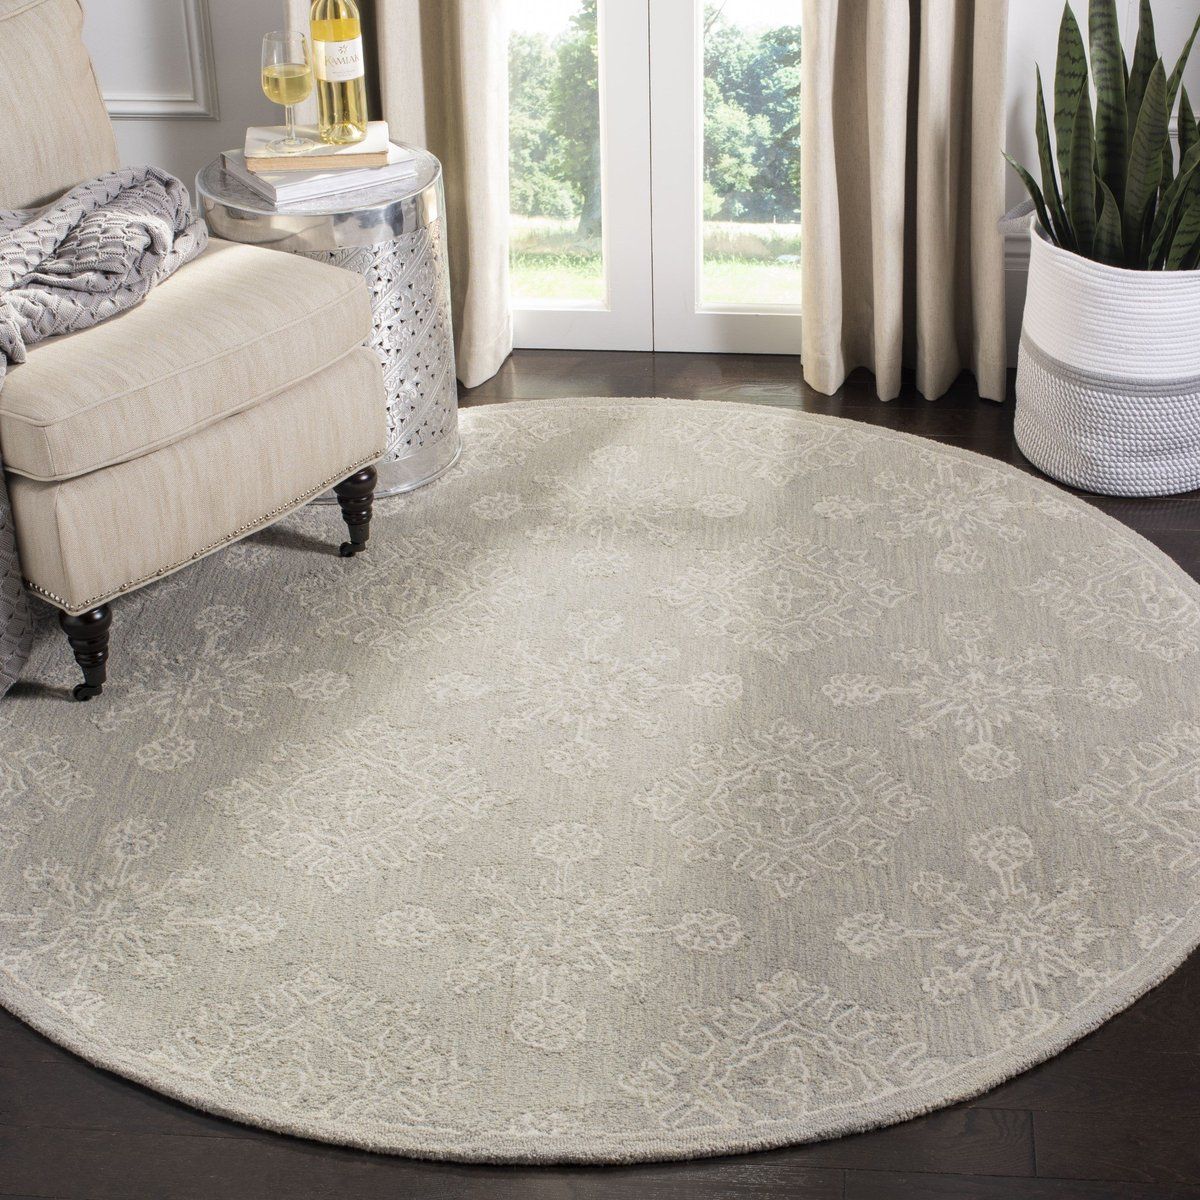 Safavieh Blossom Blm 950 Rugs | Rugs Direct For Blossom Oval Rugs (View 8 of 15)